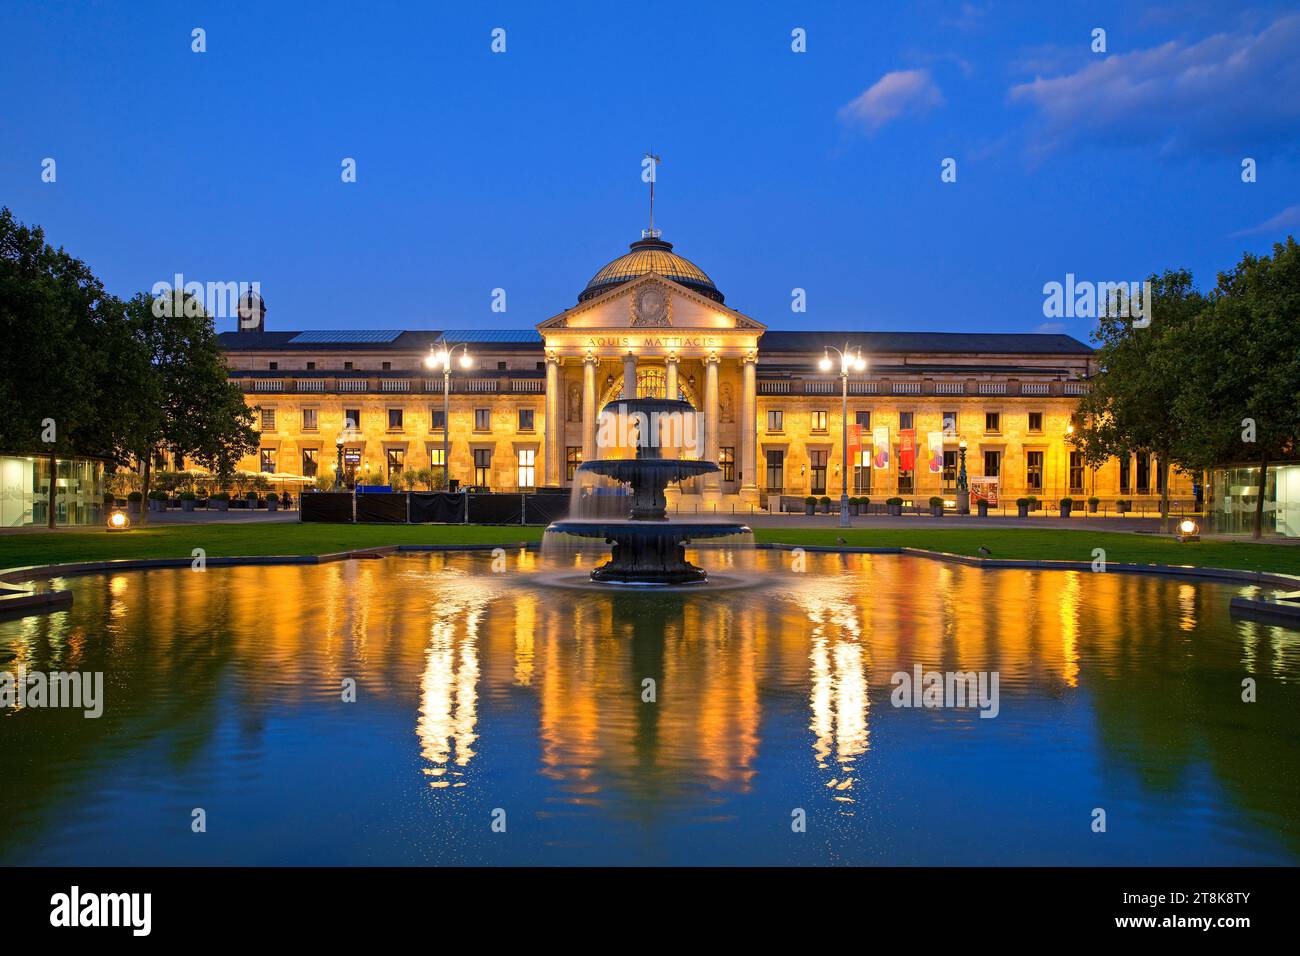 Illuminated Kurhaus and casino with cascading fountain in the evening , Germany, Hesse, Wiesbaden Stock Photo